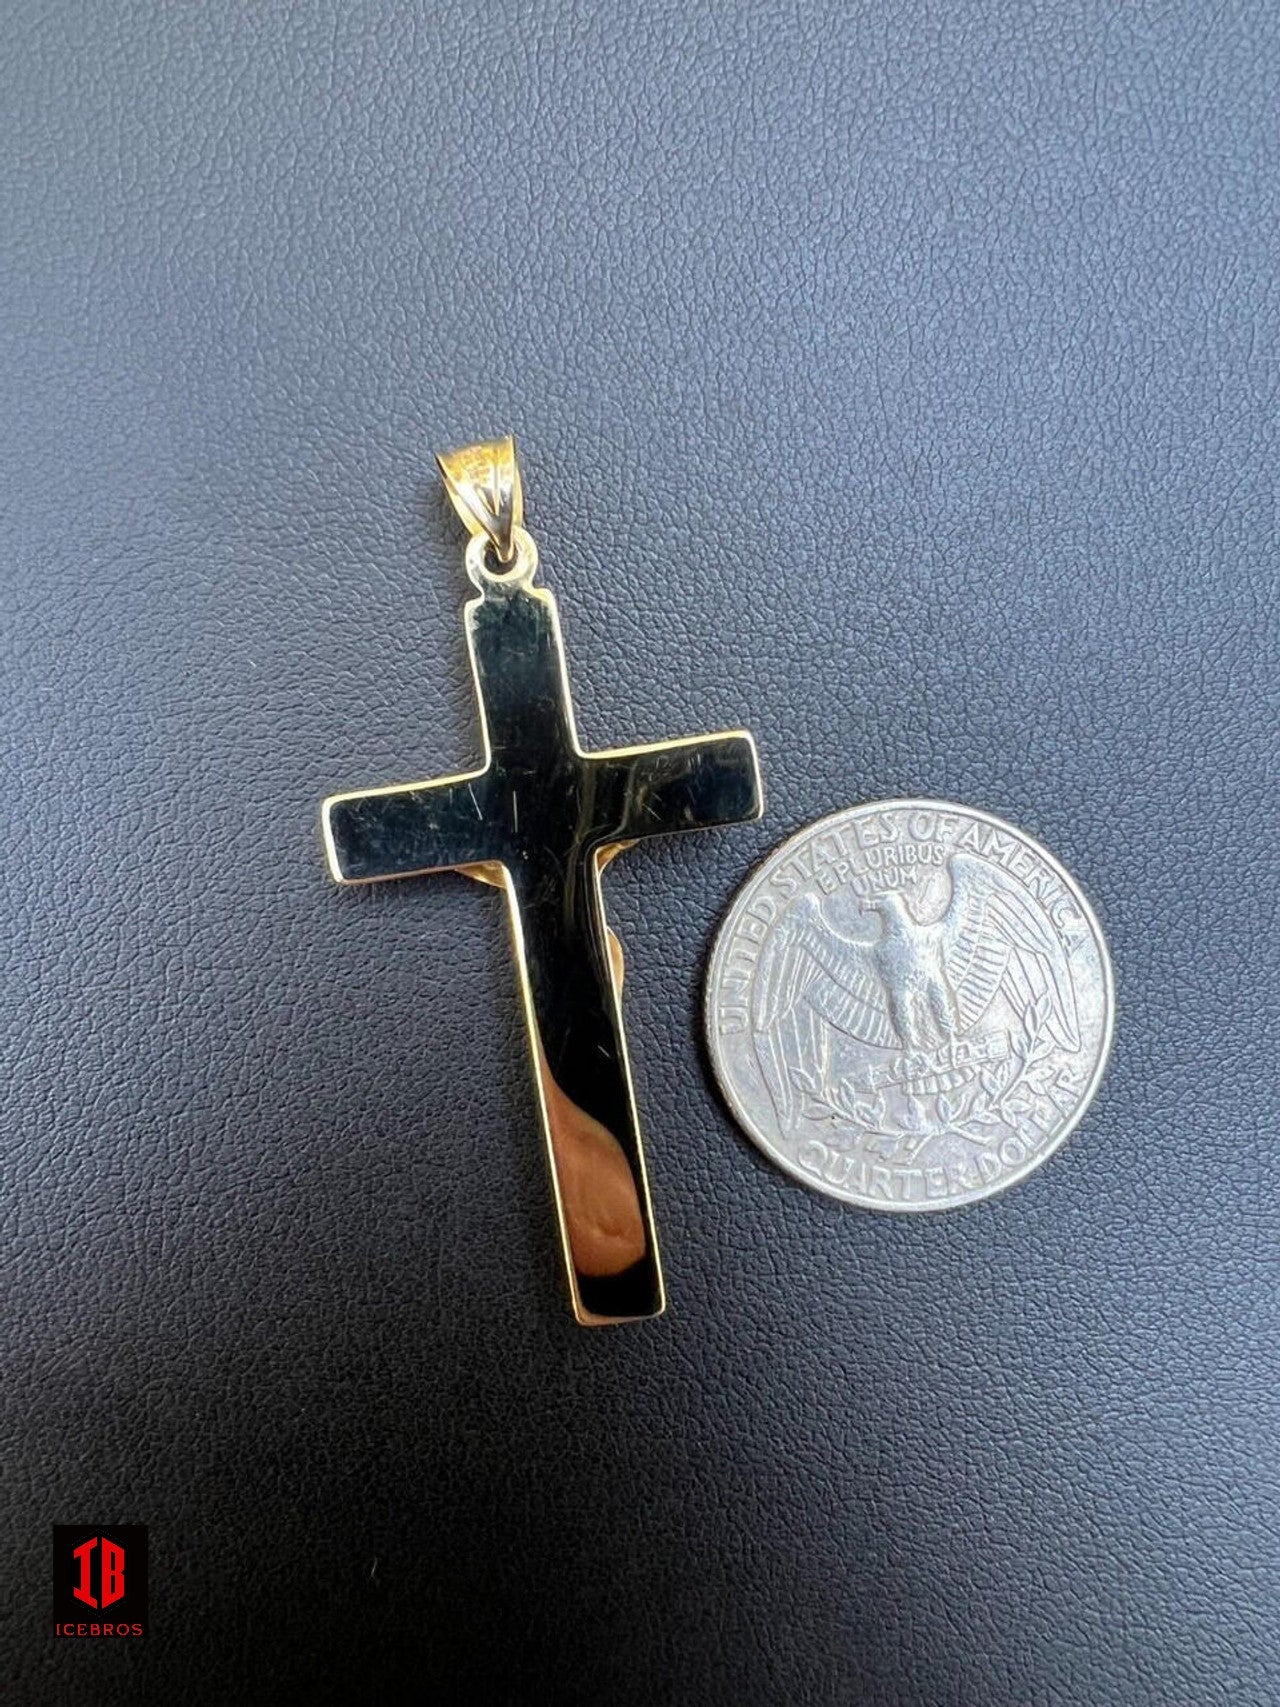 Large 1.85" Solid 14k Yellow & White Gold Cross Jesus Crucifix Pendant Necklace